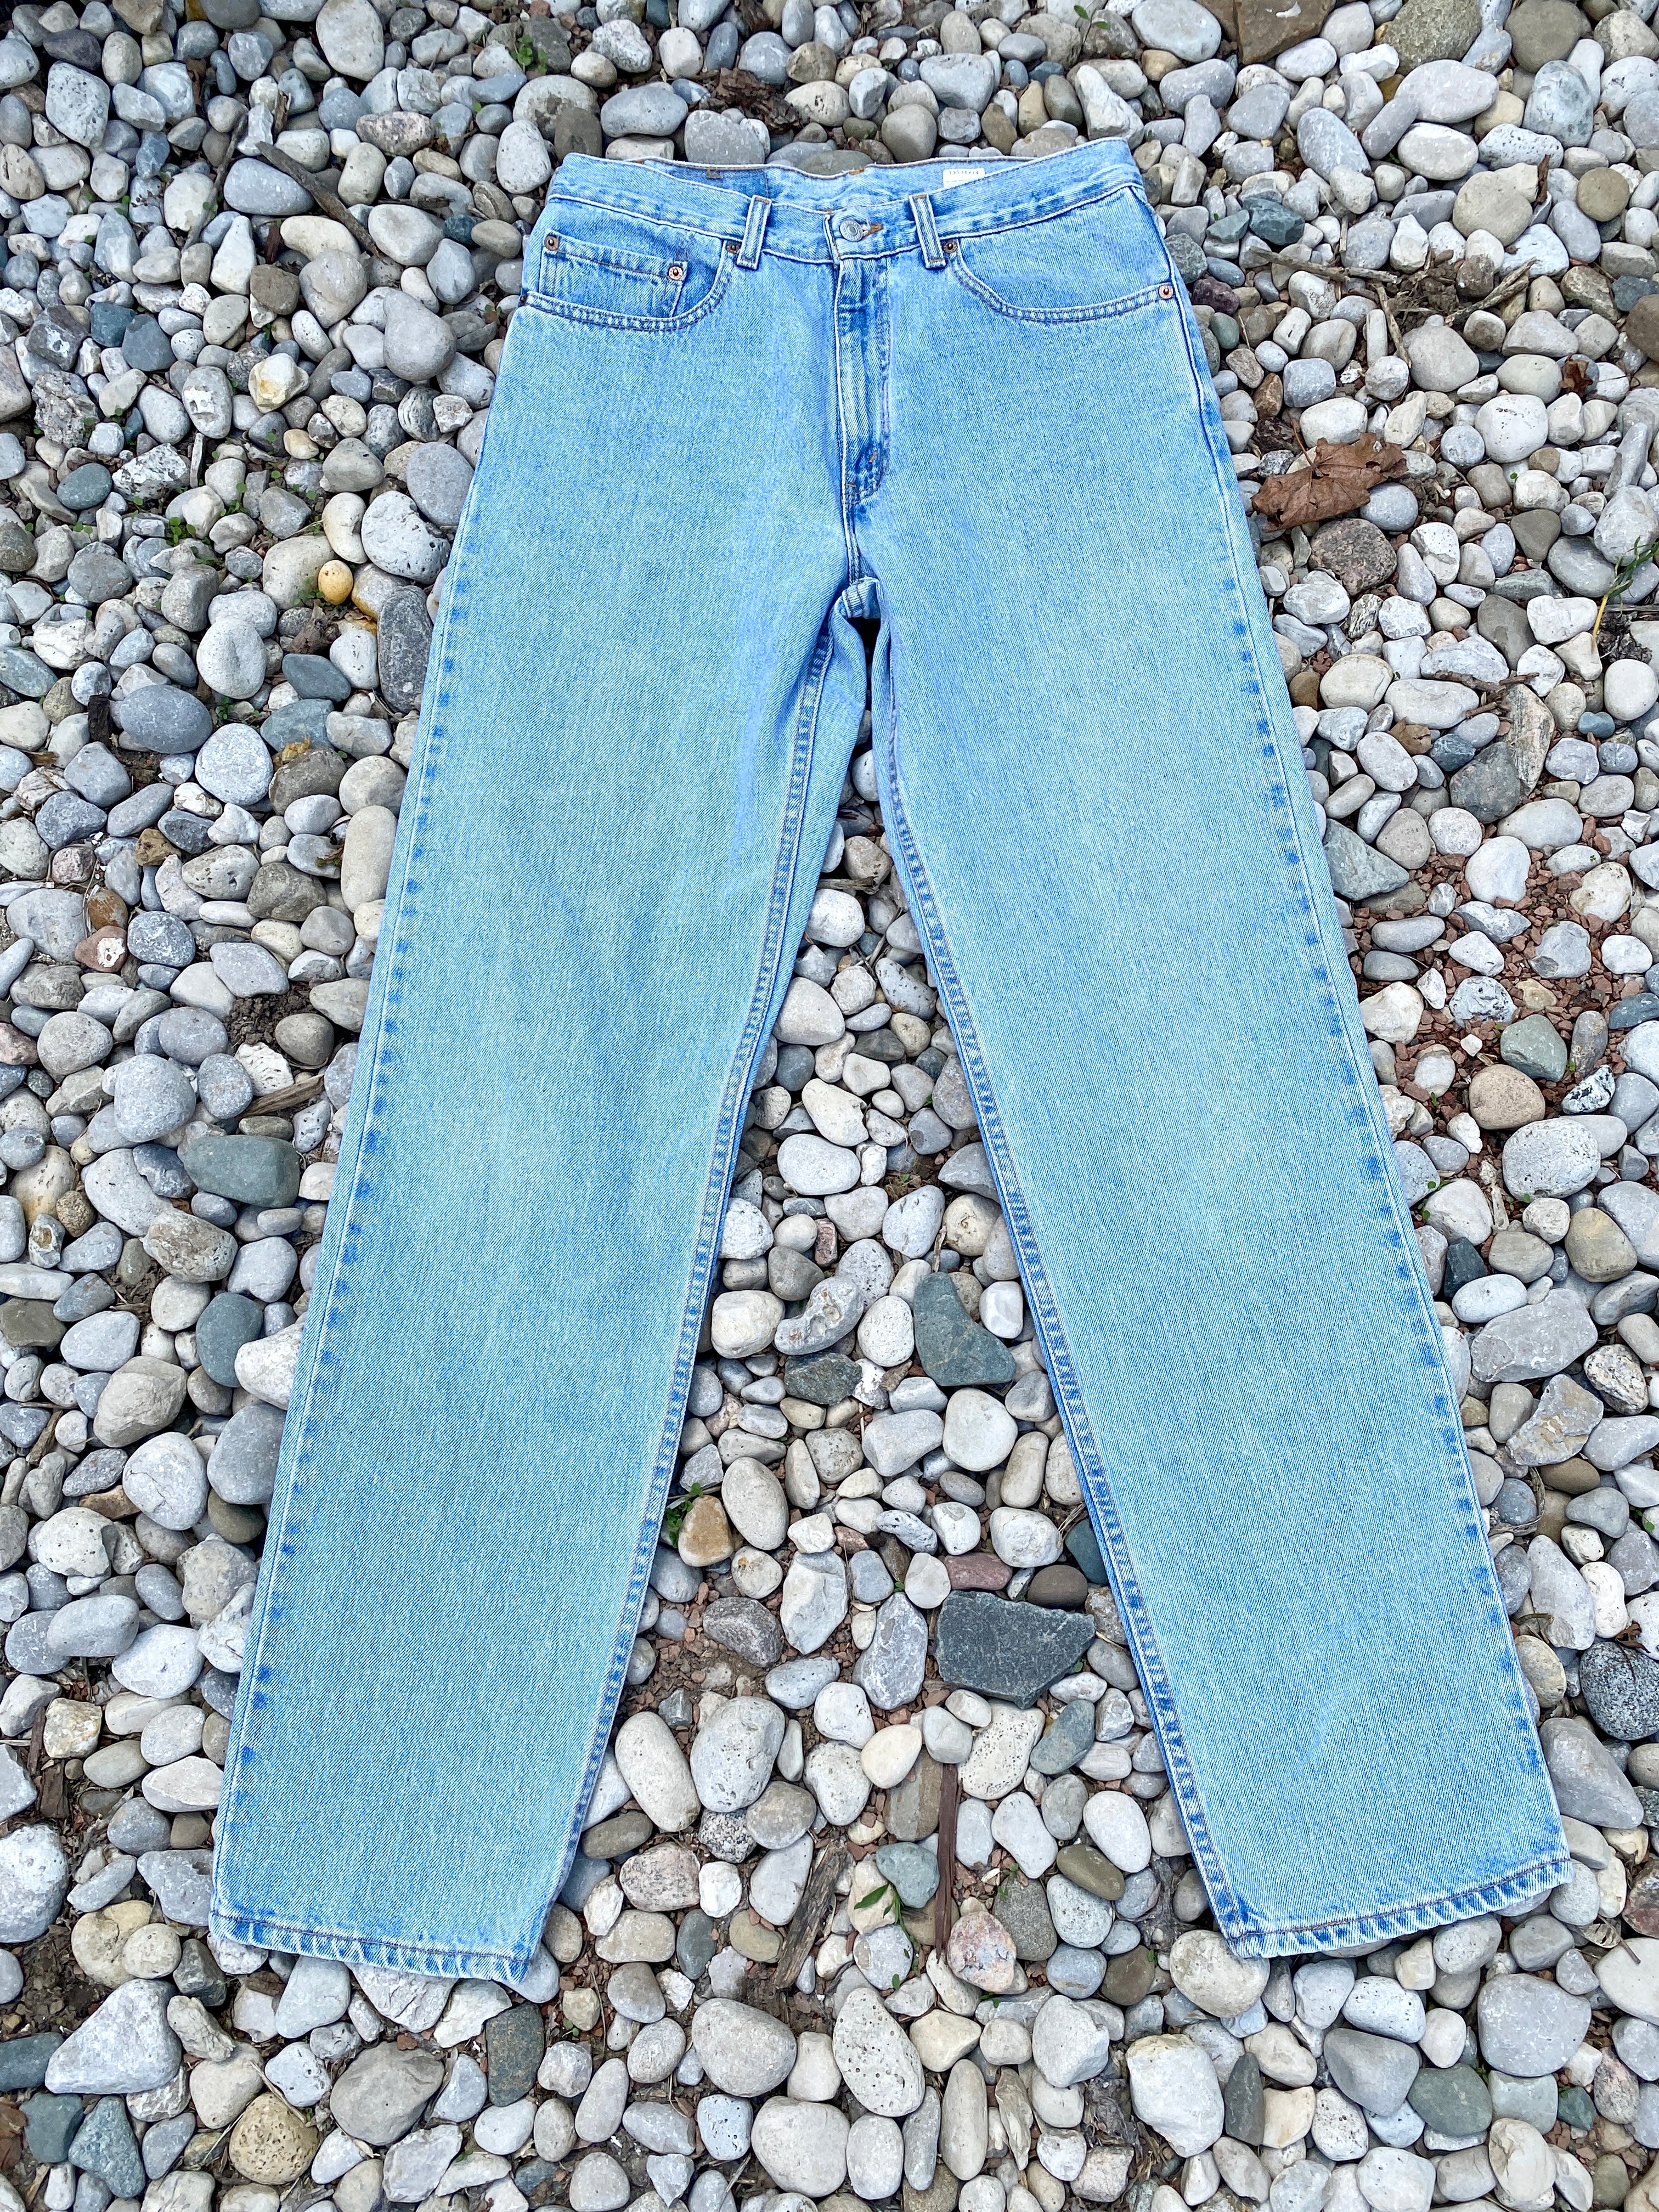 Vintage Levis 550 Light Wash Jeans size 32 Made in USA